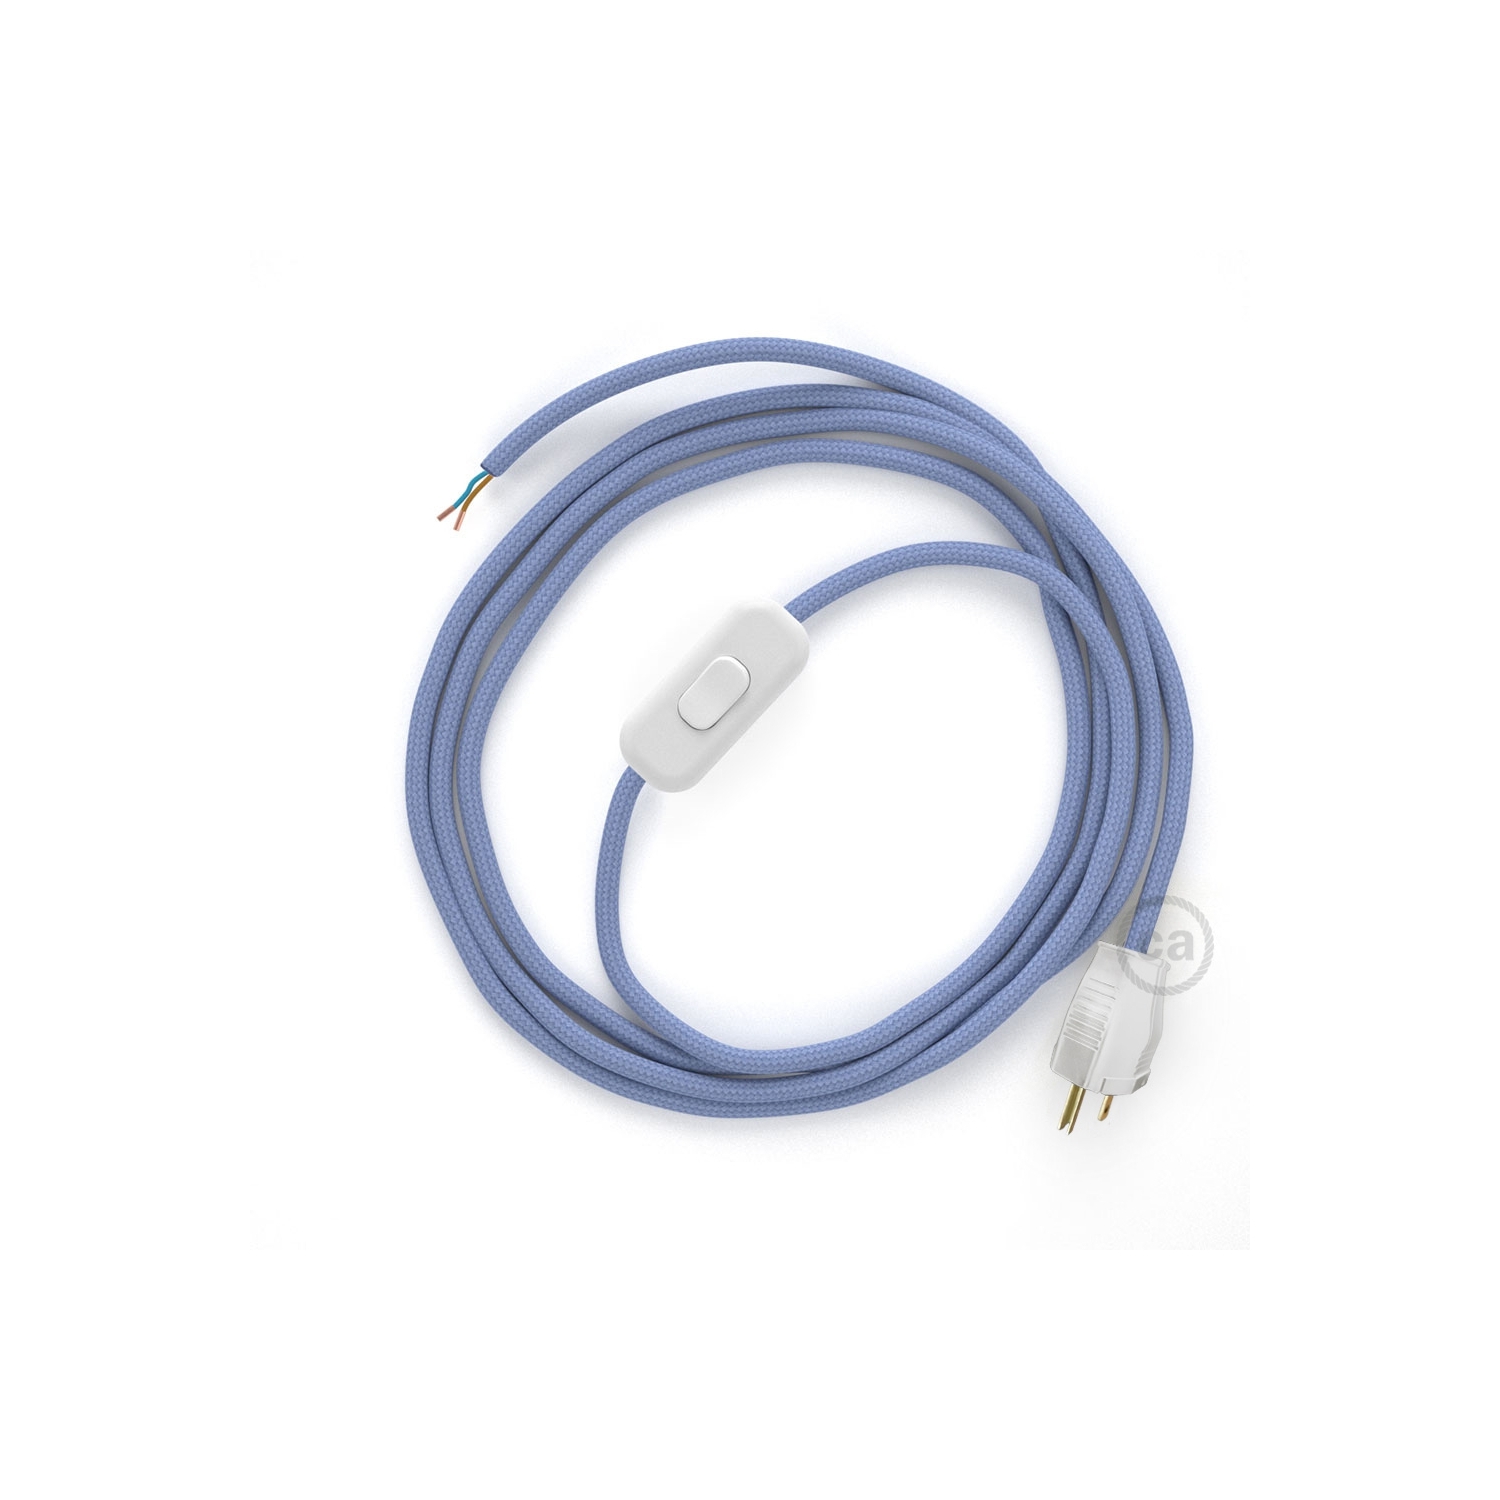 Power Cord with in-line switch, RM07 Lilac Rayon - Choose color of switch/plug